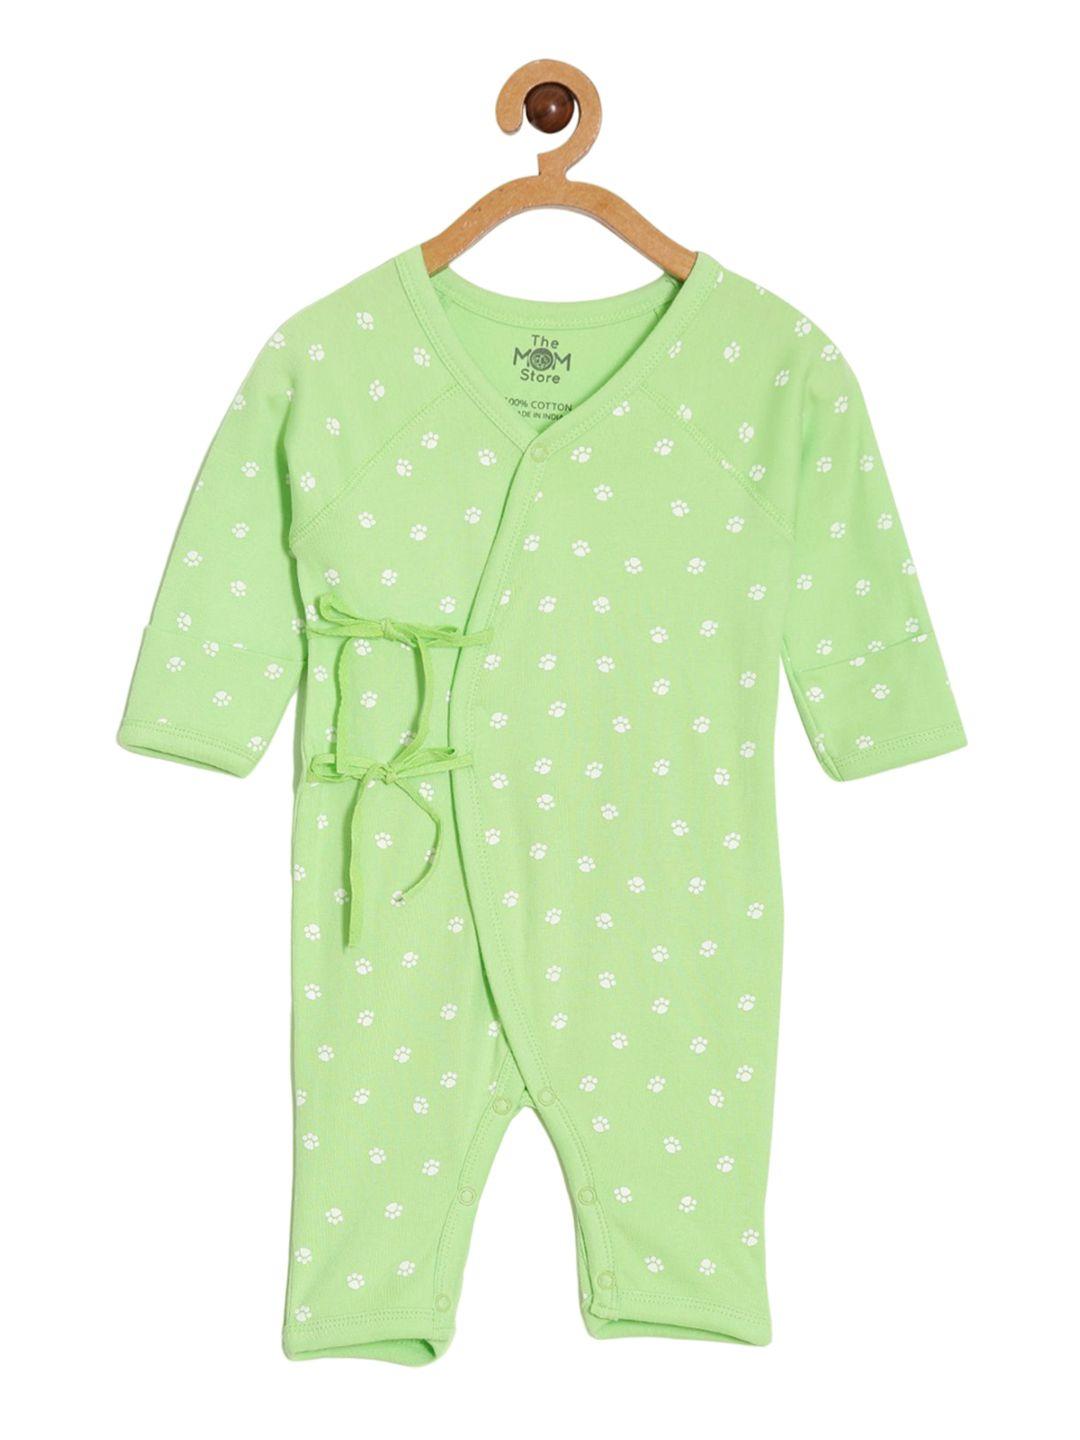 the mom store infants printed cotton romper